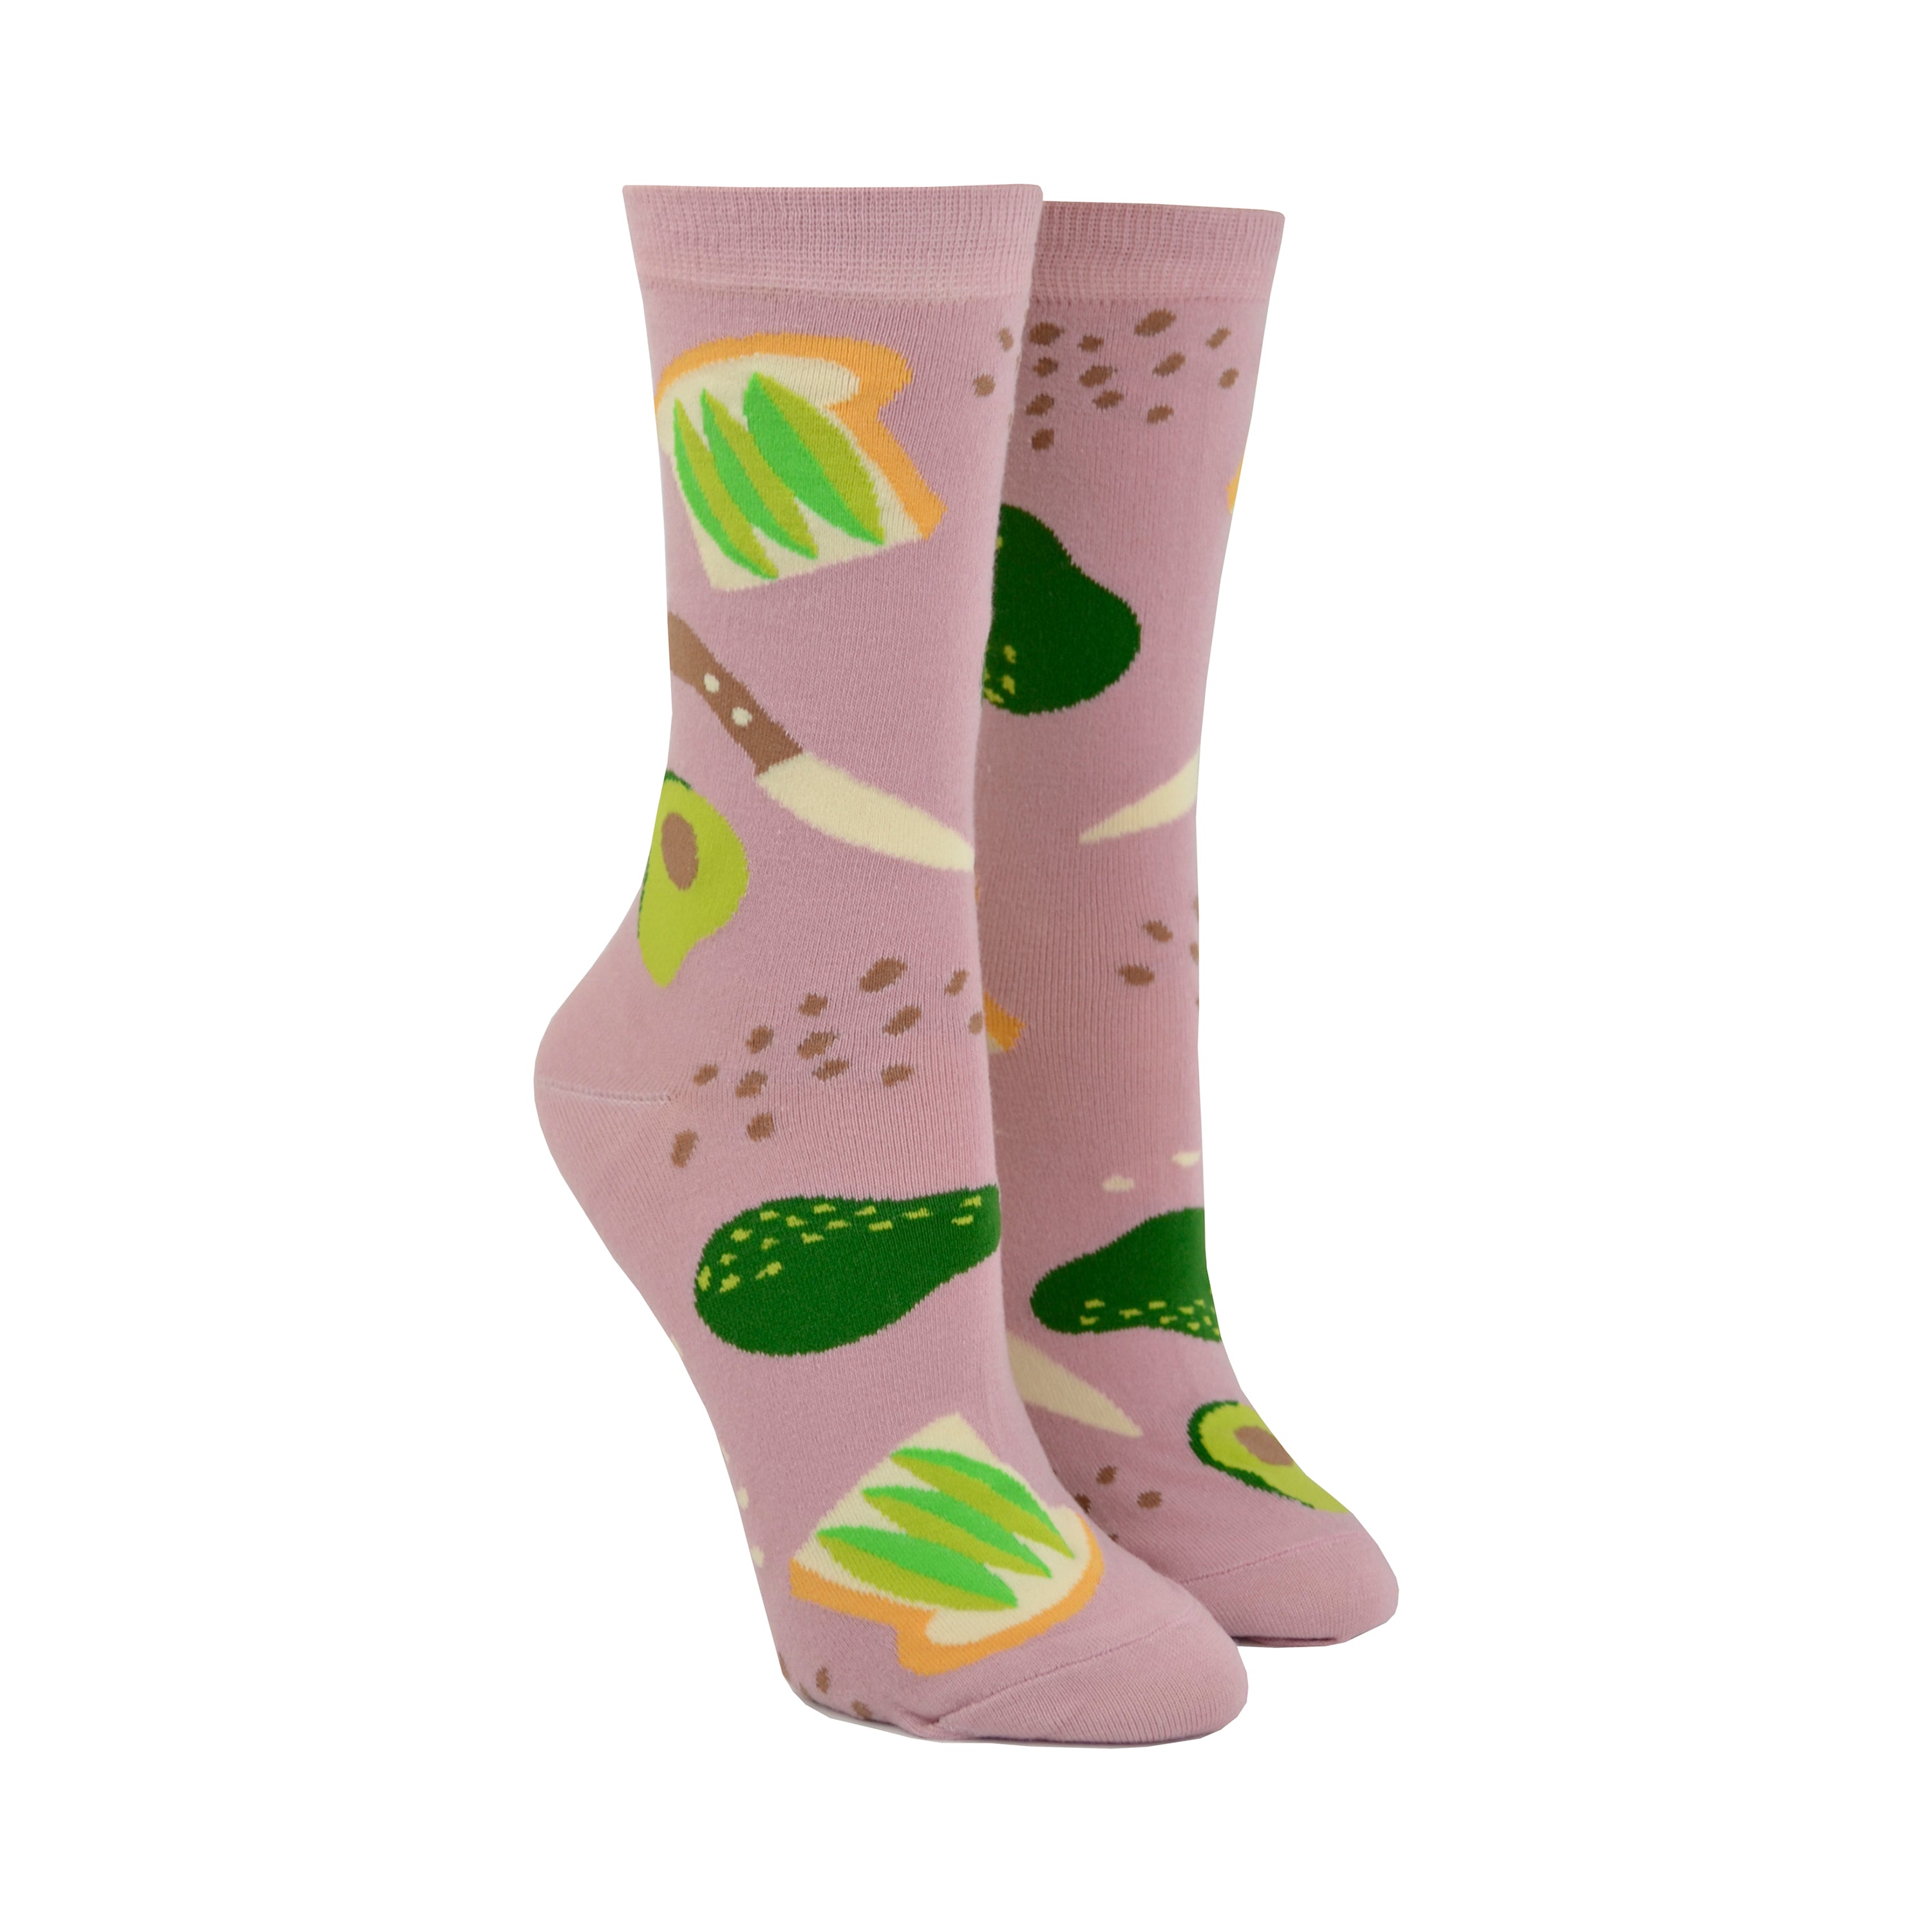 Shown on leg forms, a pair of Yellow Owl Workshop brand women's cotton crew socks in a light brown with an avocado toast theme. Each sock features avocado toast, avocados, salt and pepper, and a knife.